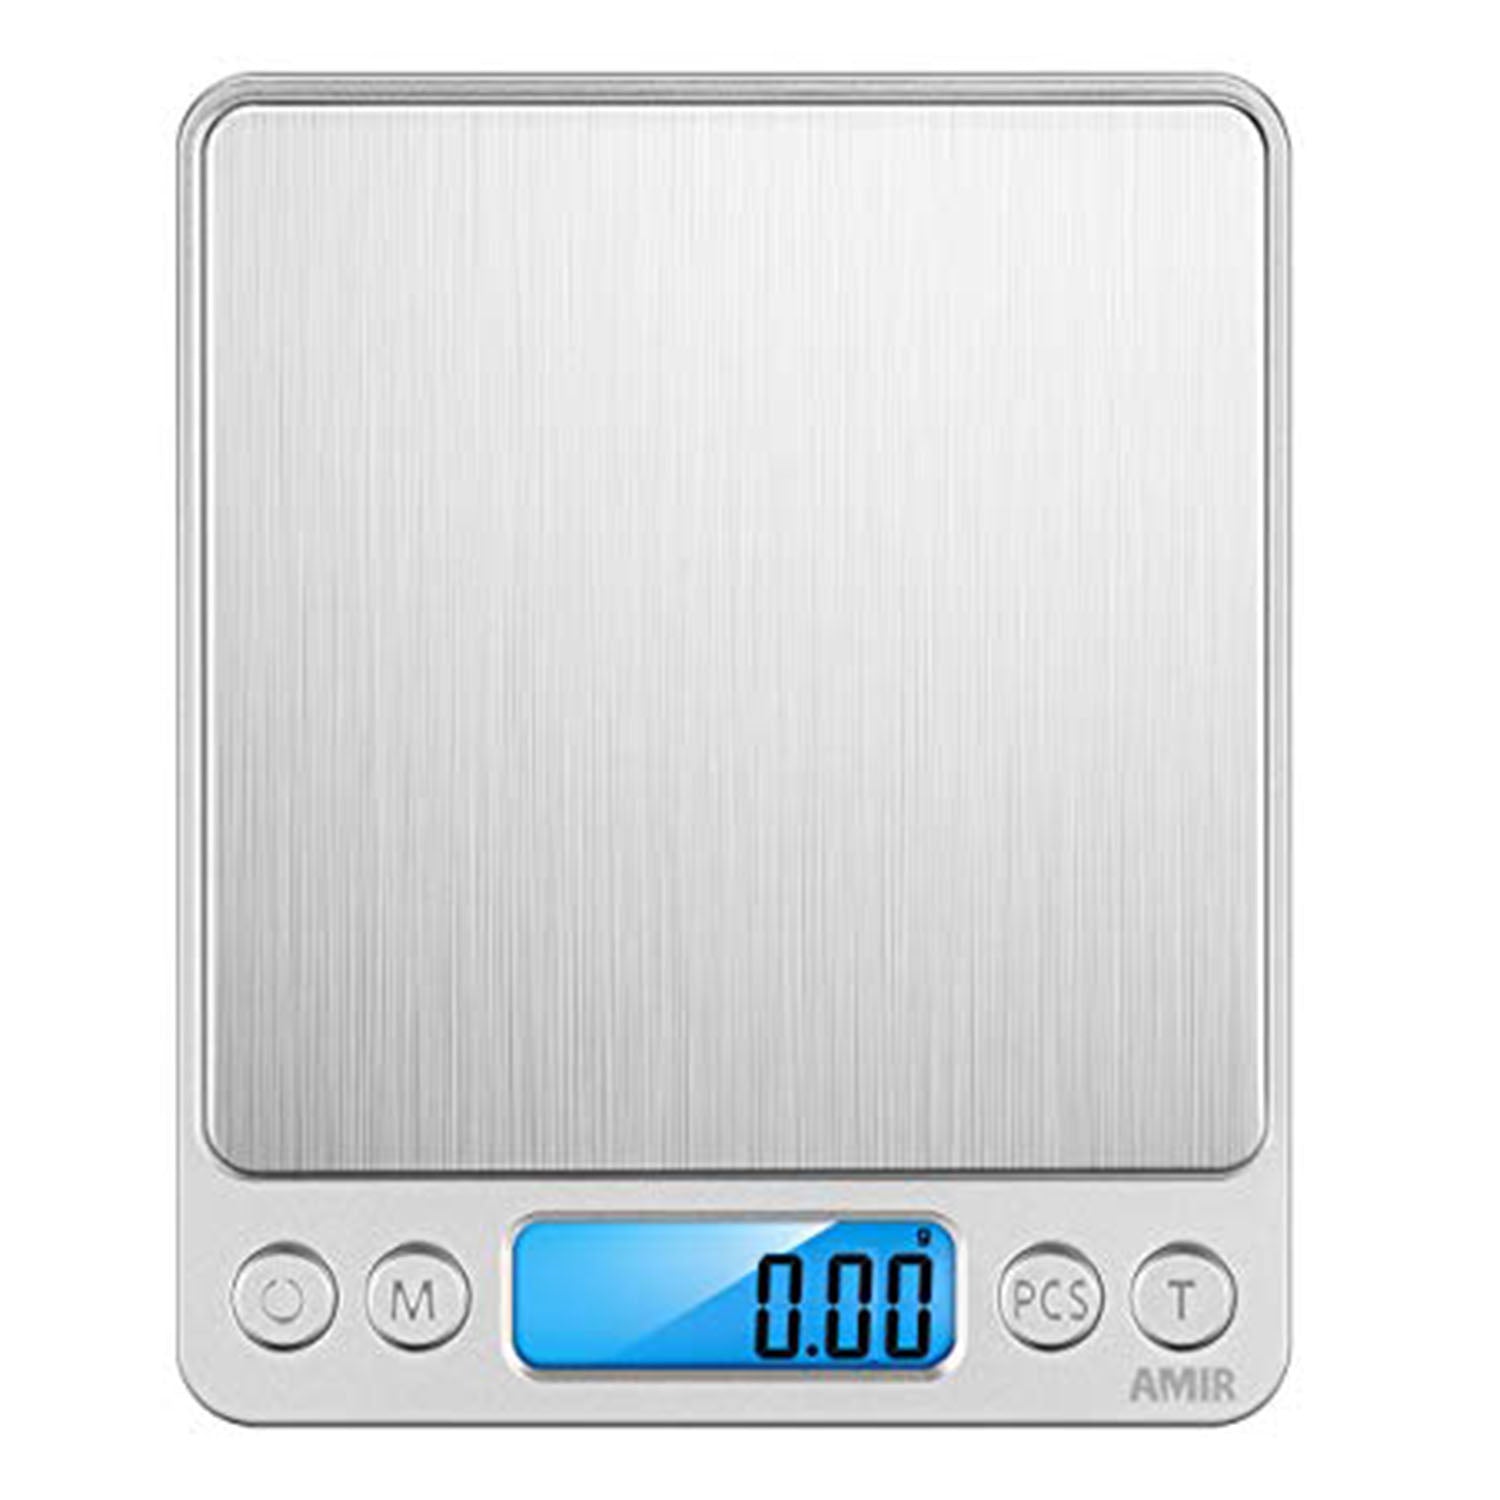 Large High Precision Scale - 500g